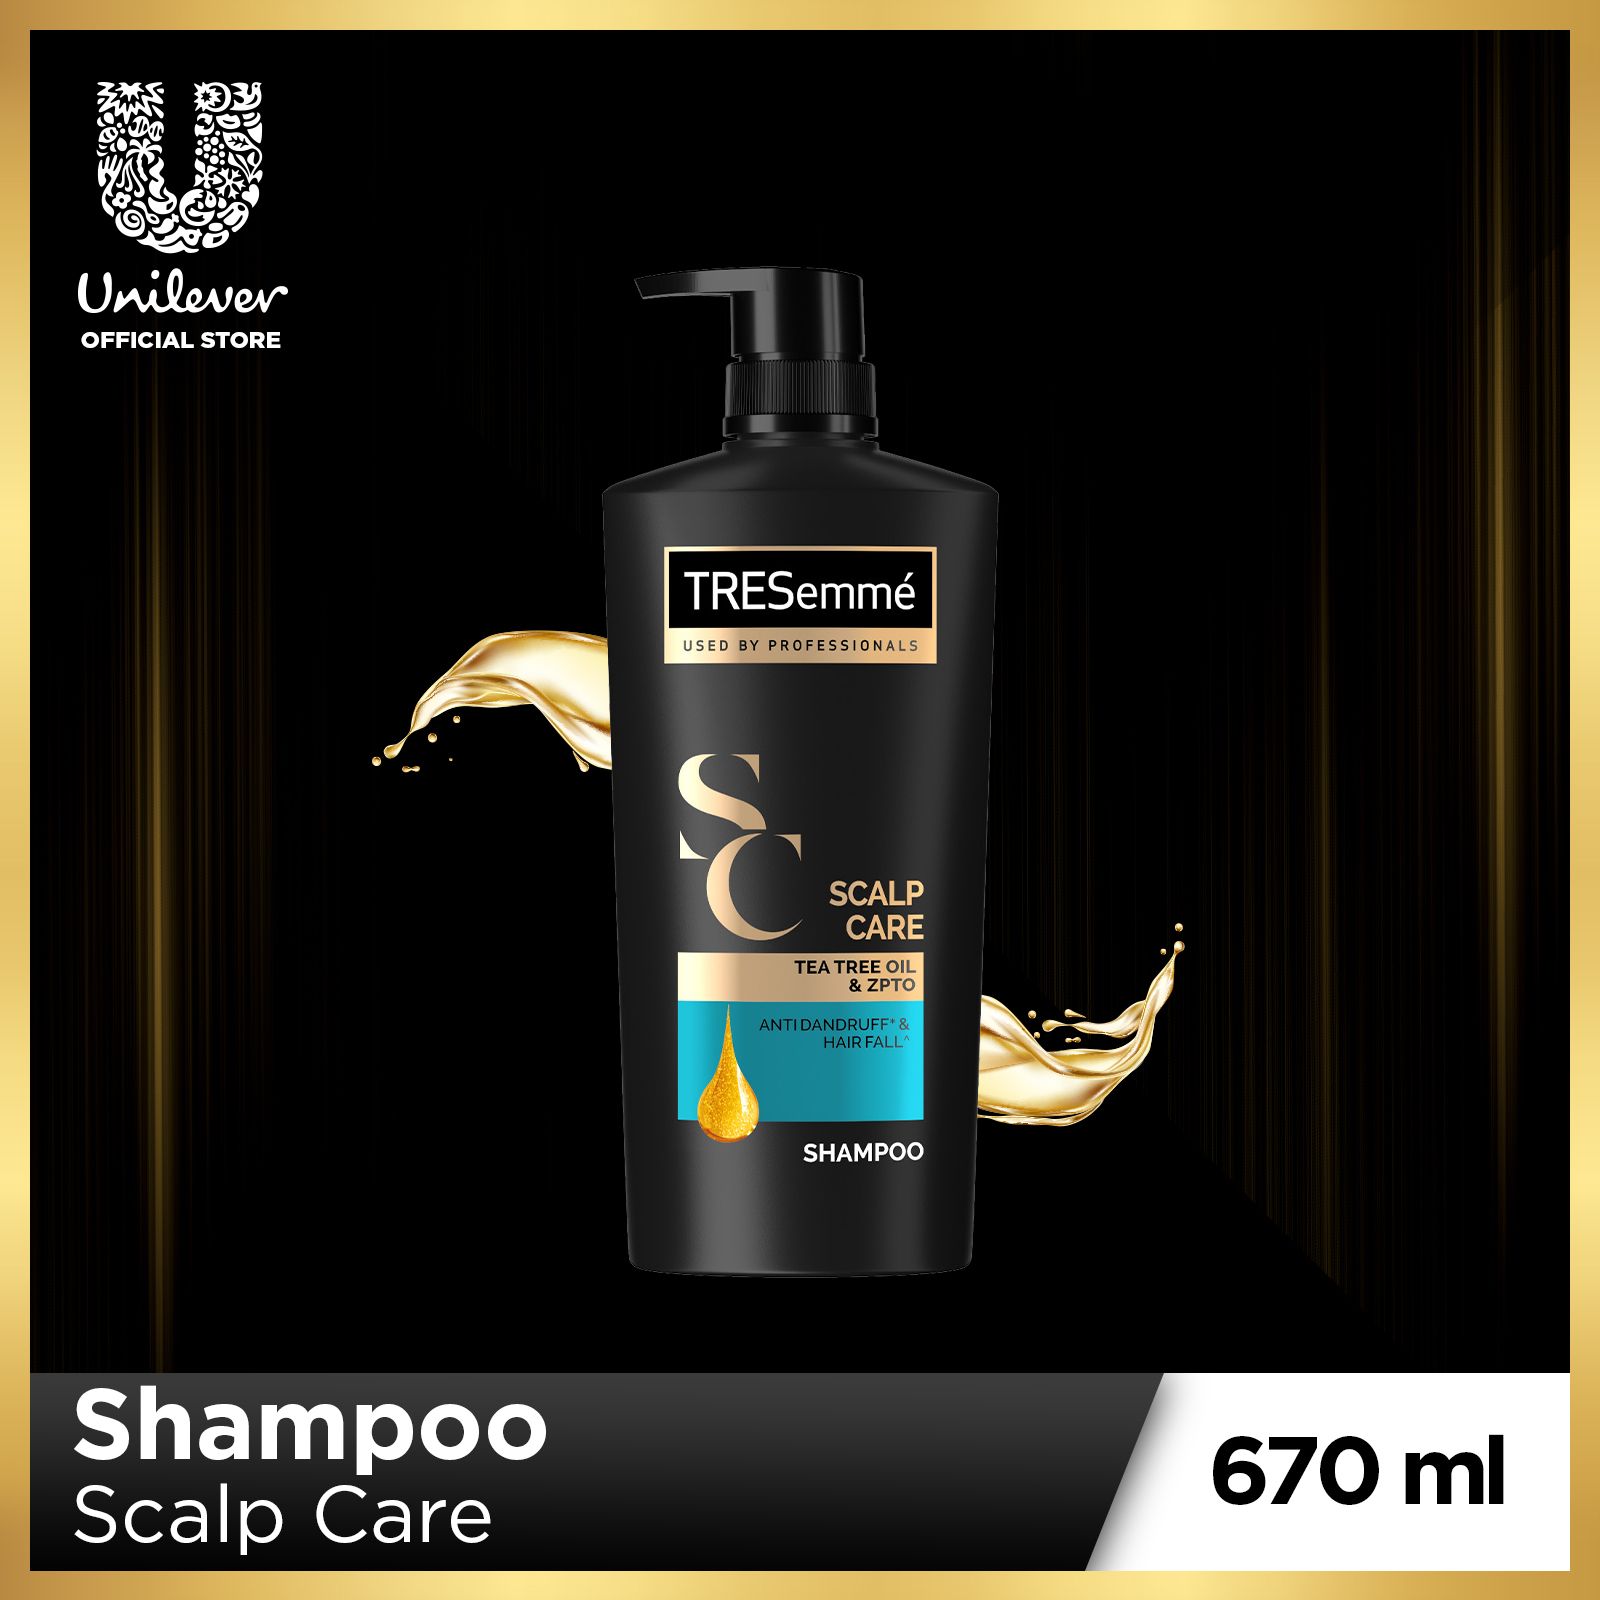 TRESemme Hair Fall Defence Shampoo, 580 ml by StanningEra by TRESemme -  Shop Online for Beauty in New Zealand